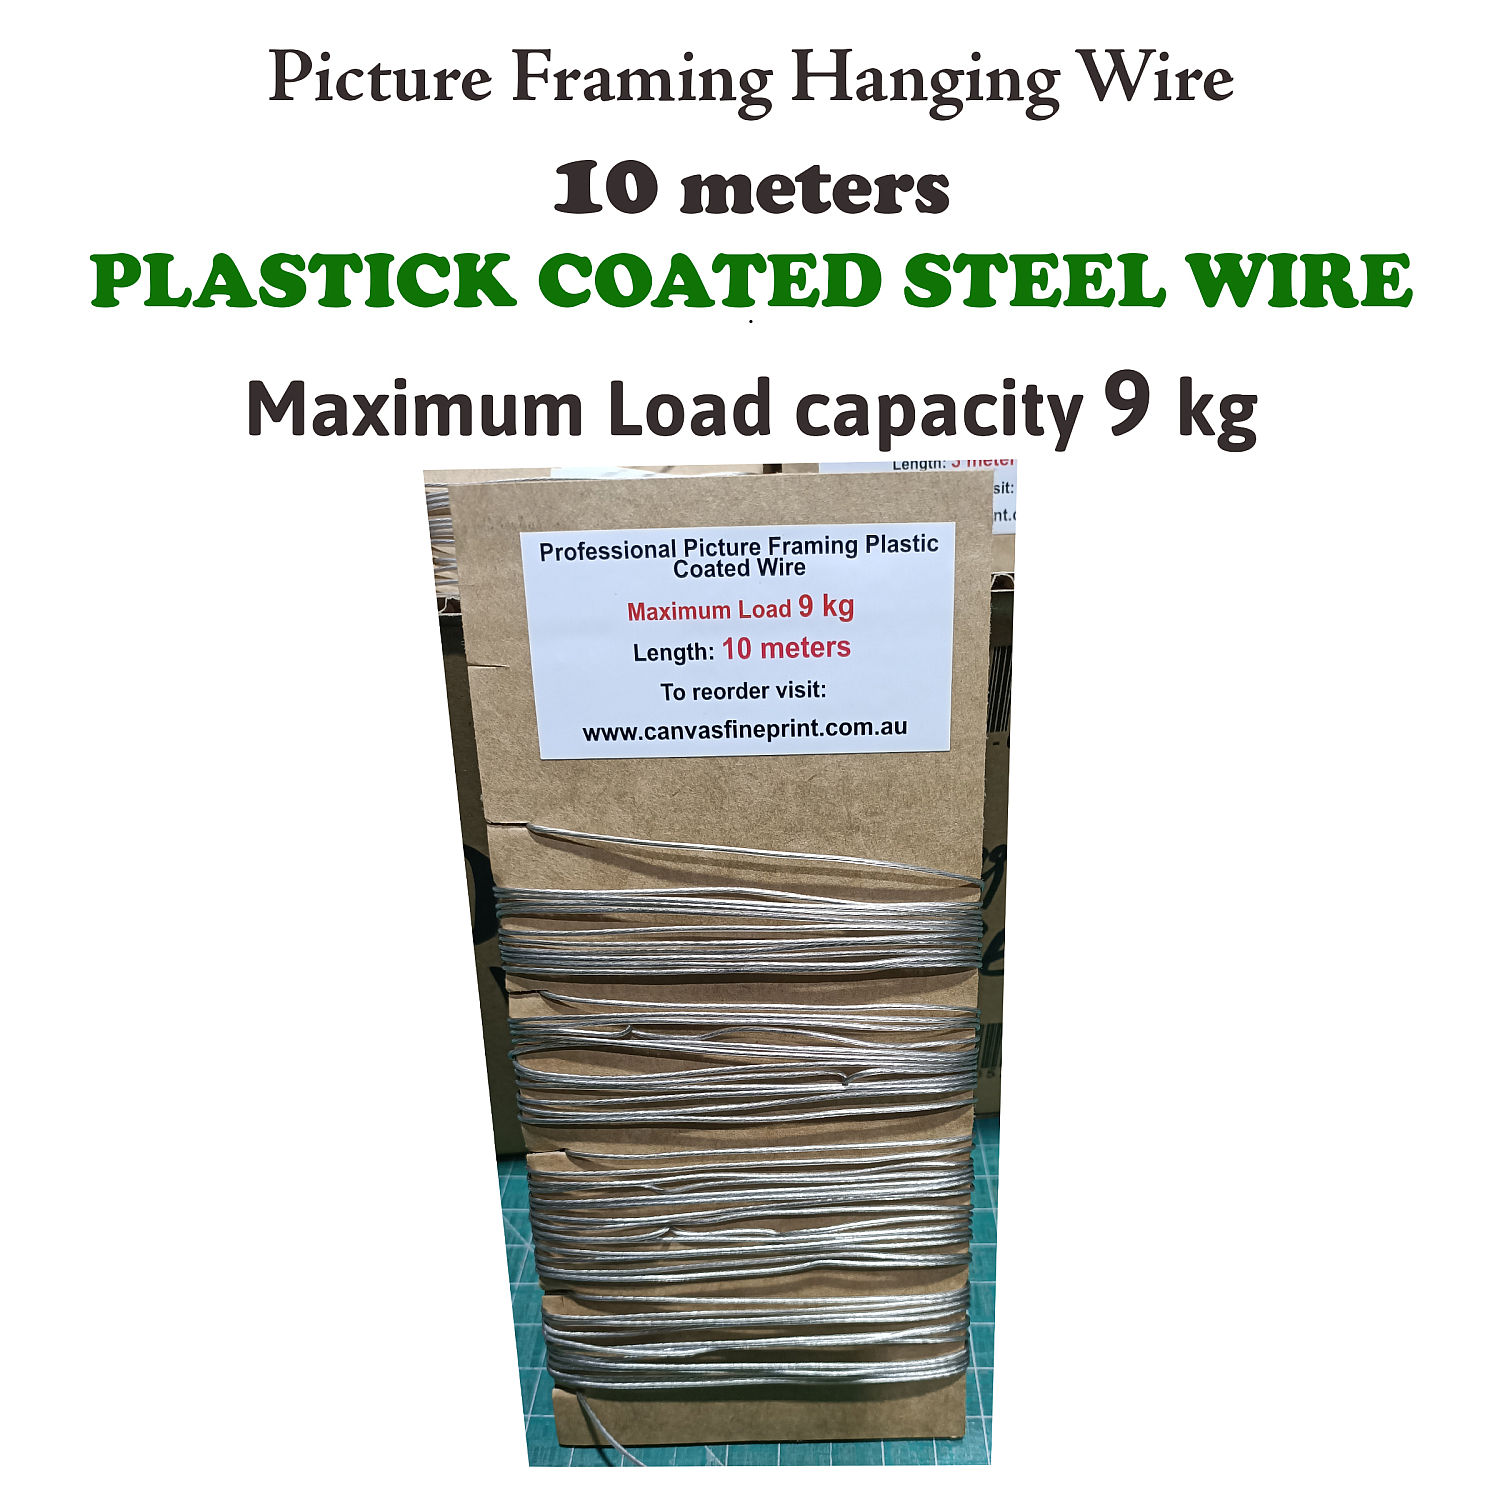 Picture Framing Hanging Plastic Coated Steel Wire 10m, Weight Load 9kg | 9kg_wire_10_meters.jpg